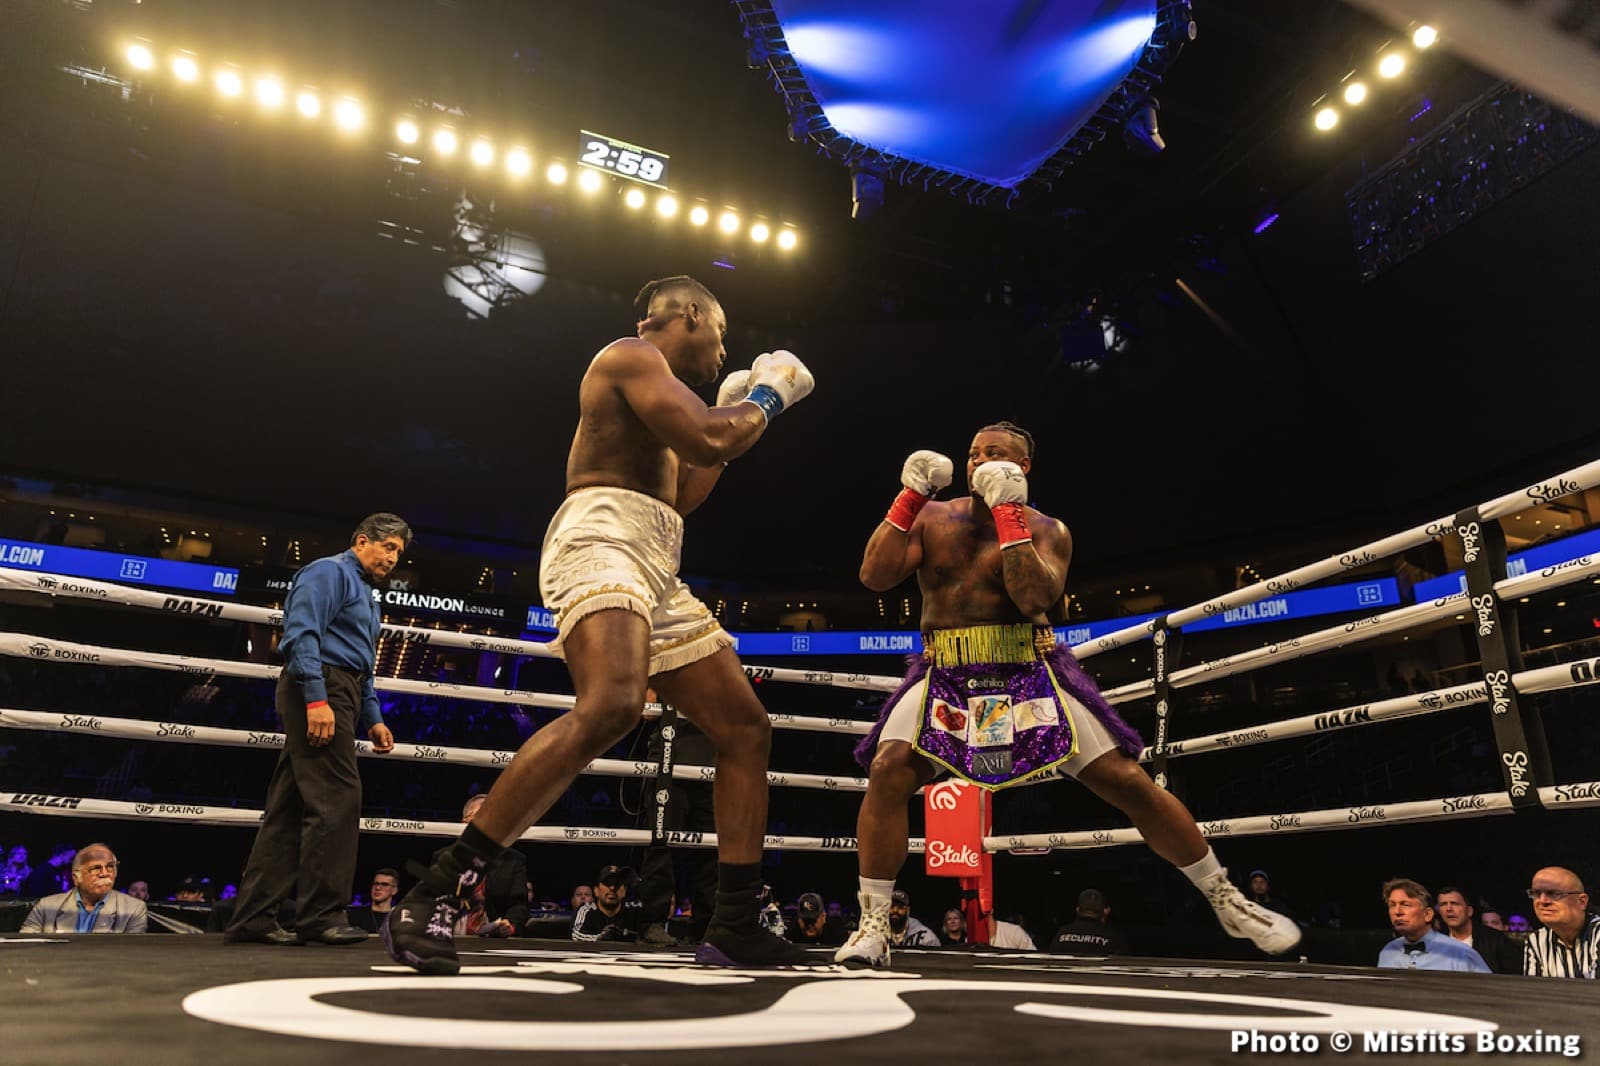 Misfits Boxing 3 / DAZN Live Results & Photos